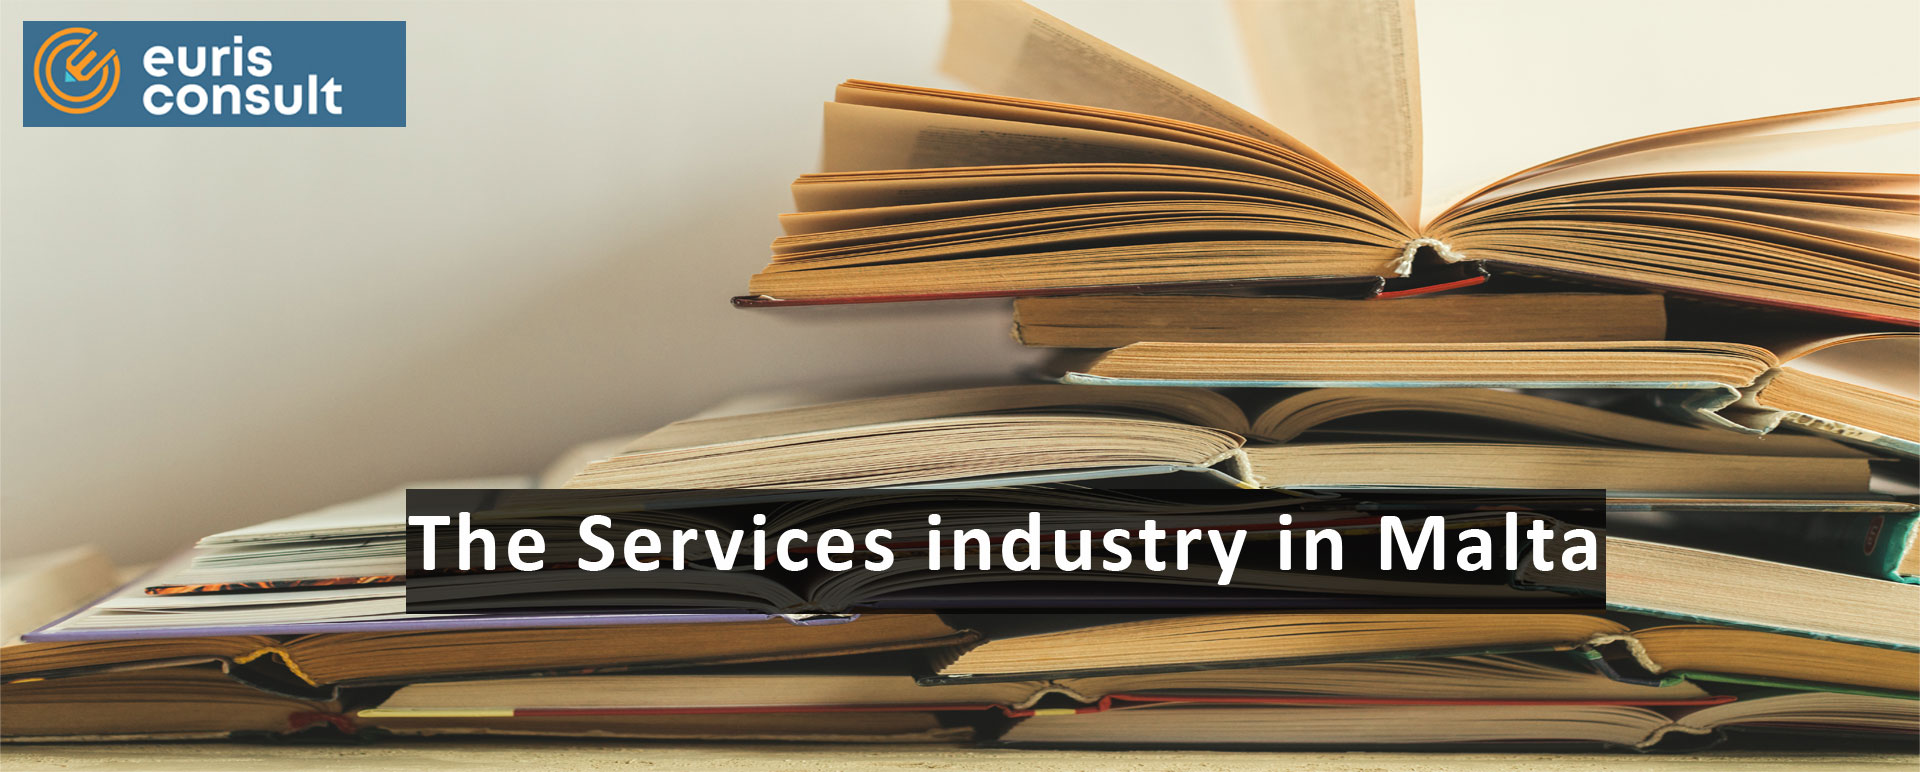 Services industry